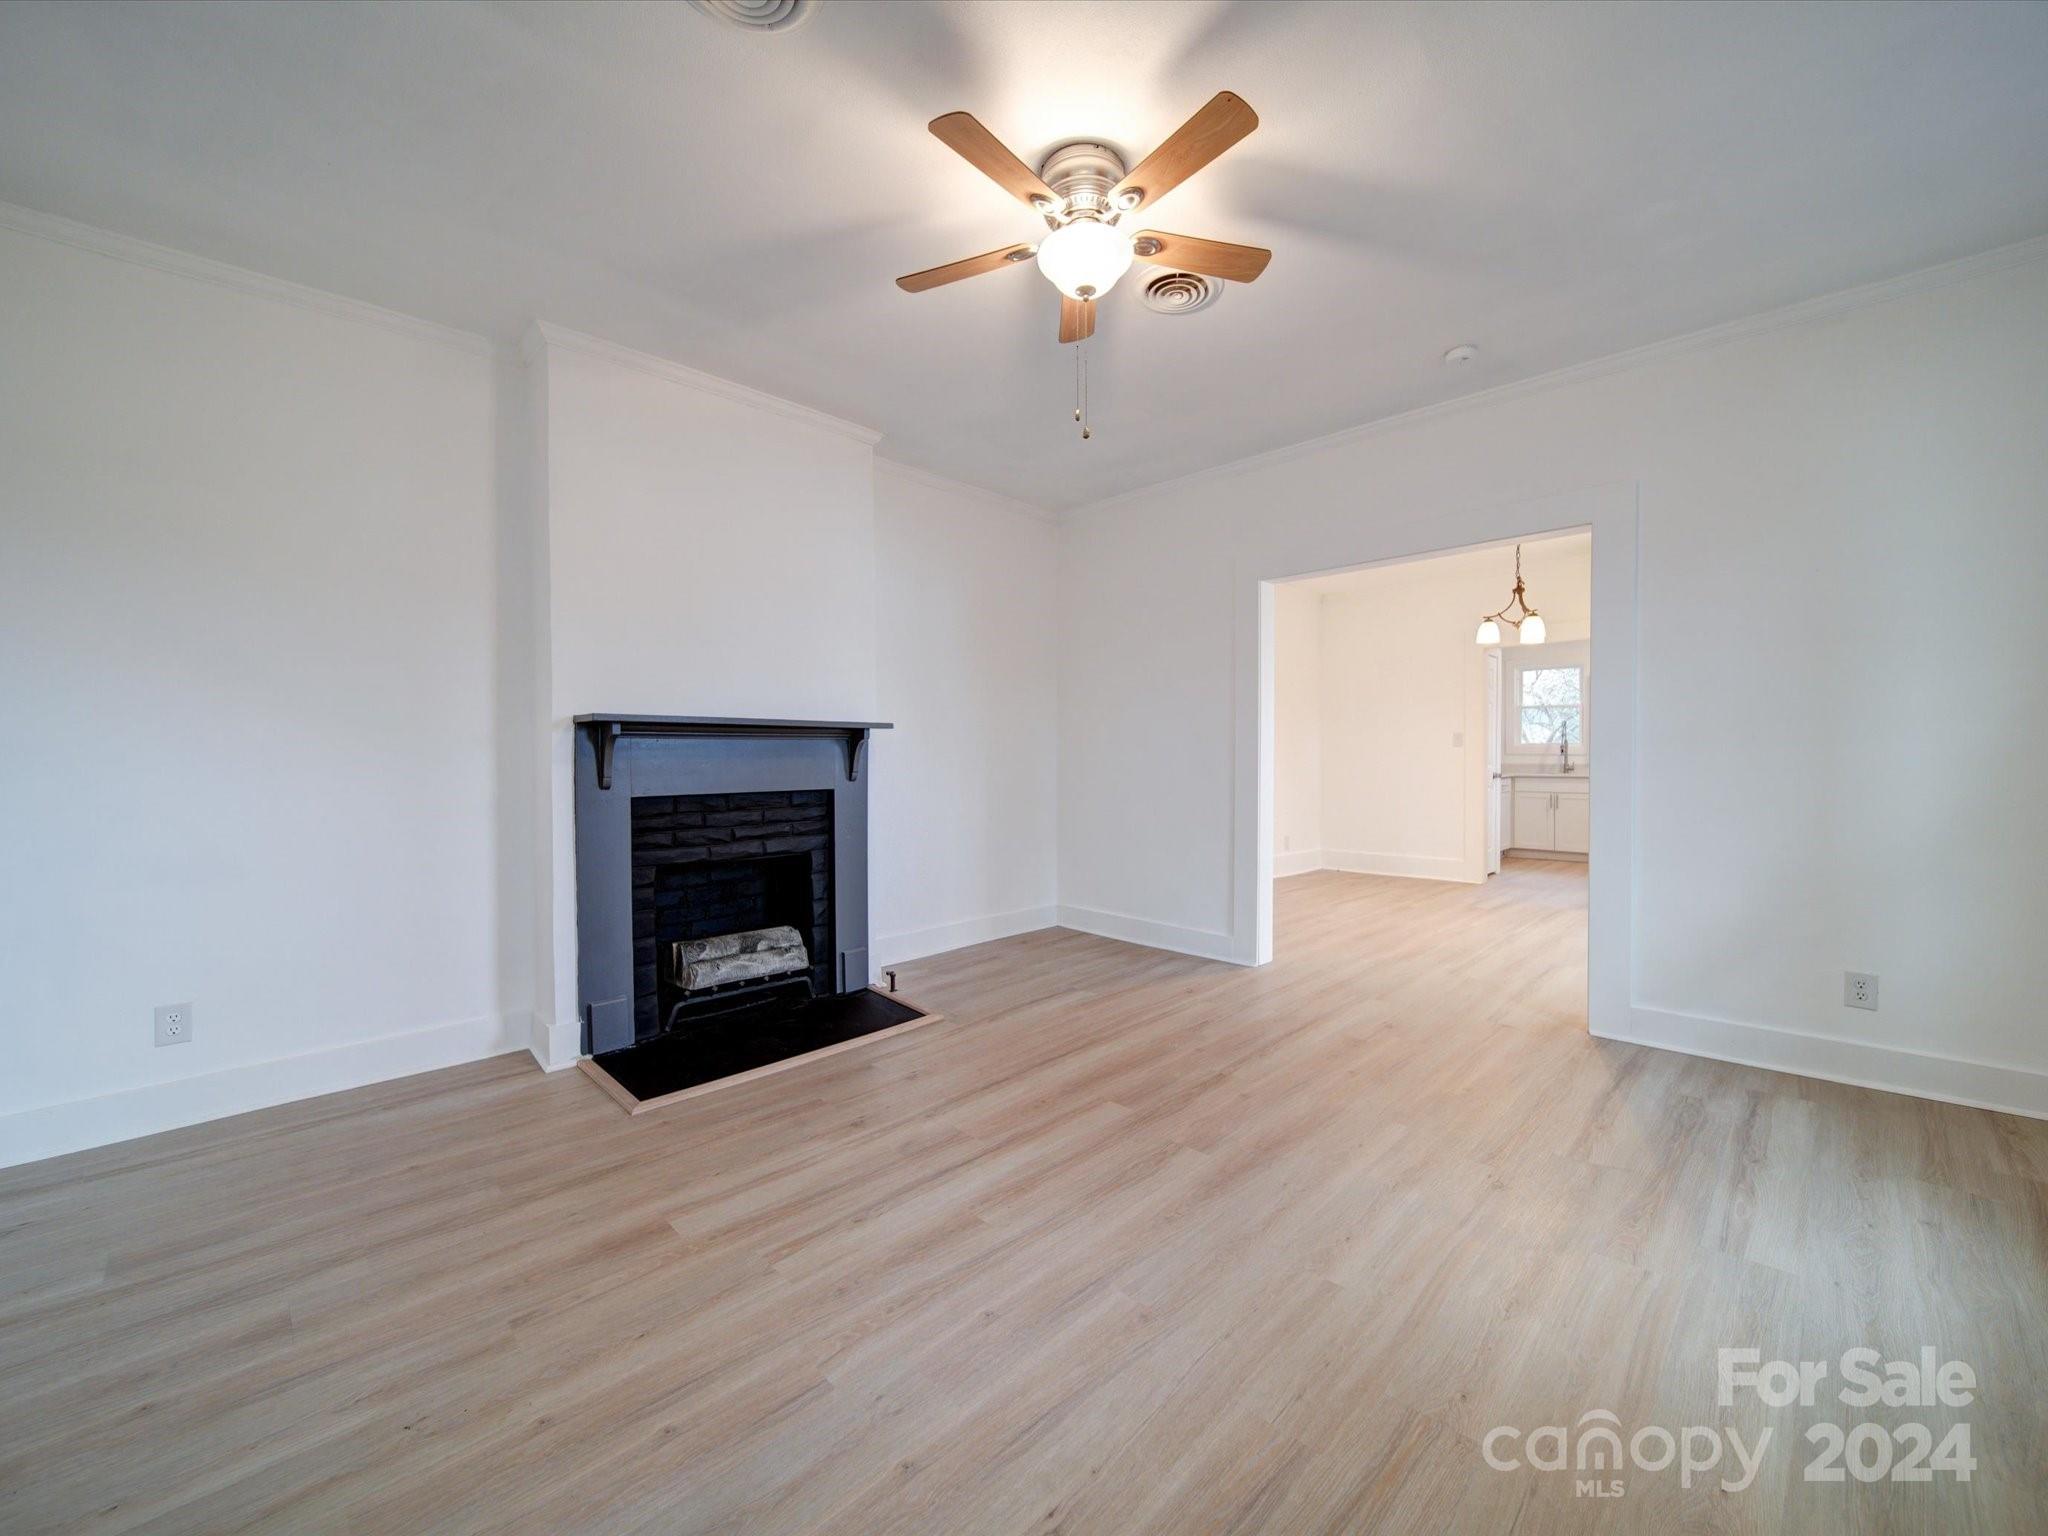 a view of an empty room with wooden floor a fireplace and a window